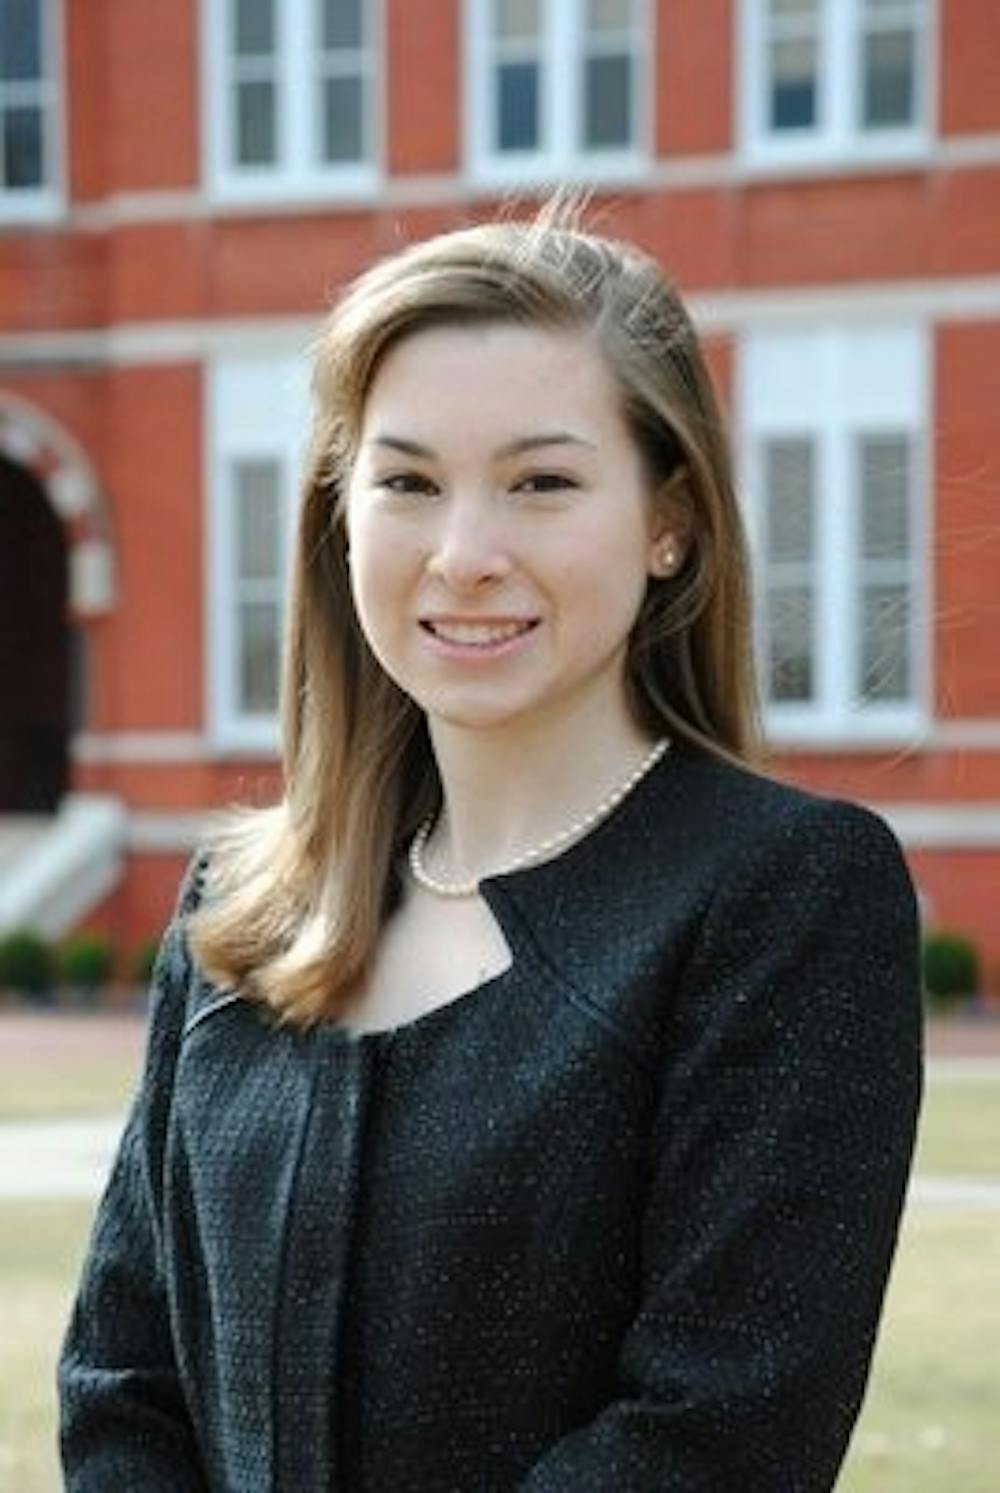 Kelsey Cardinal's Silver Wings presidential term ends in March 2013. (Courtesy of Kelsey Cardinal)